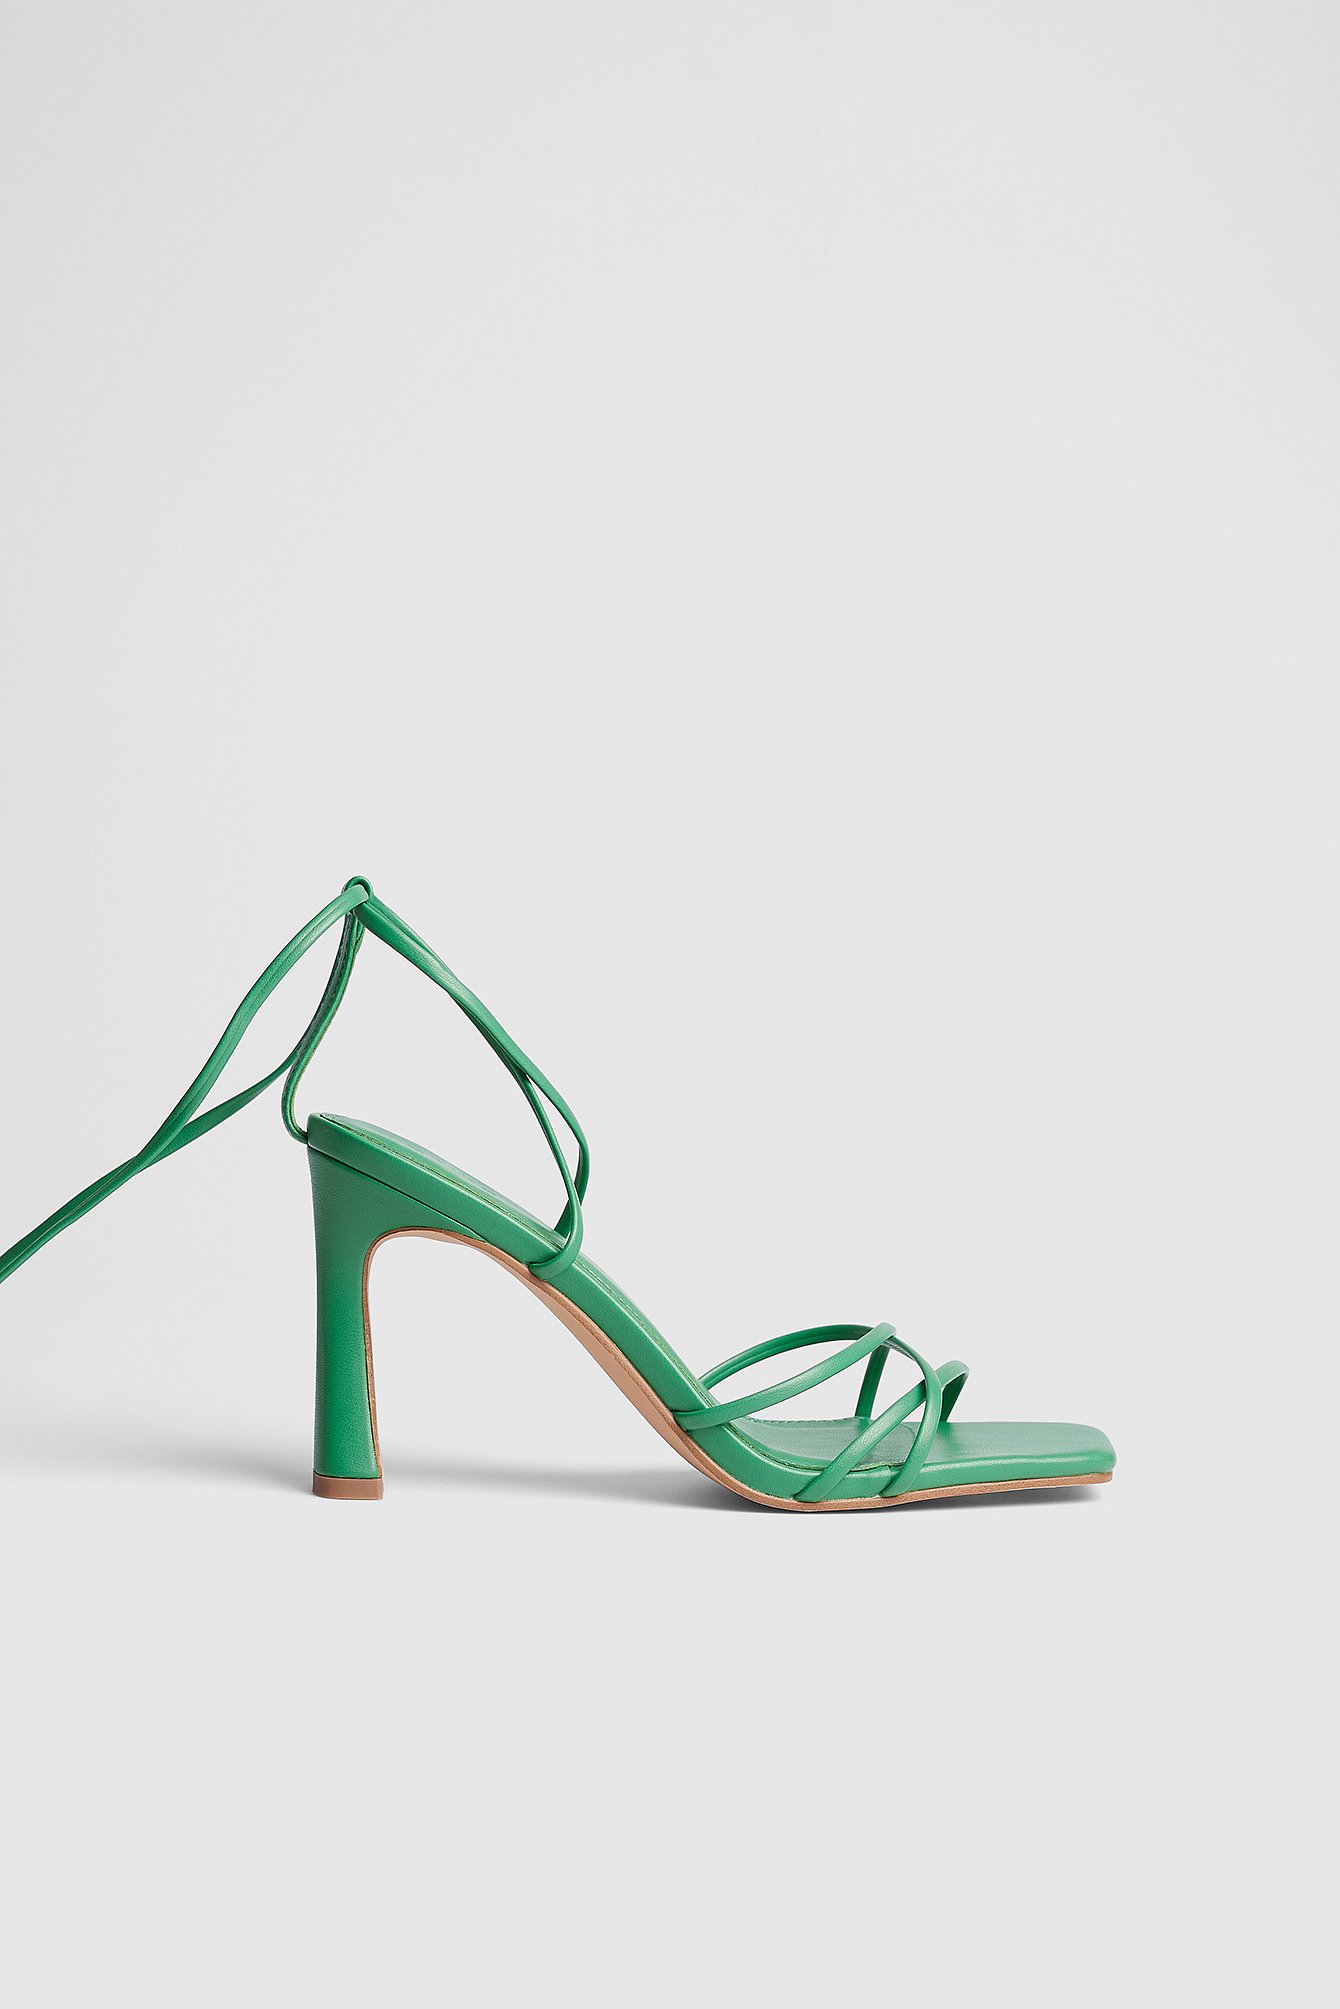 Mint Green Strappy Spool Heel Sandals - CHARLES & KEITH ID